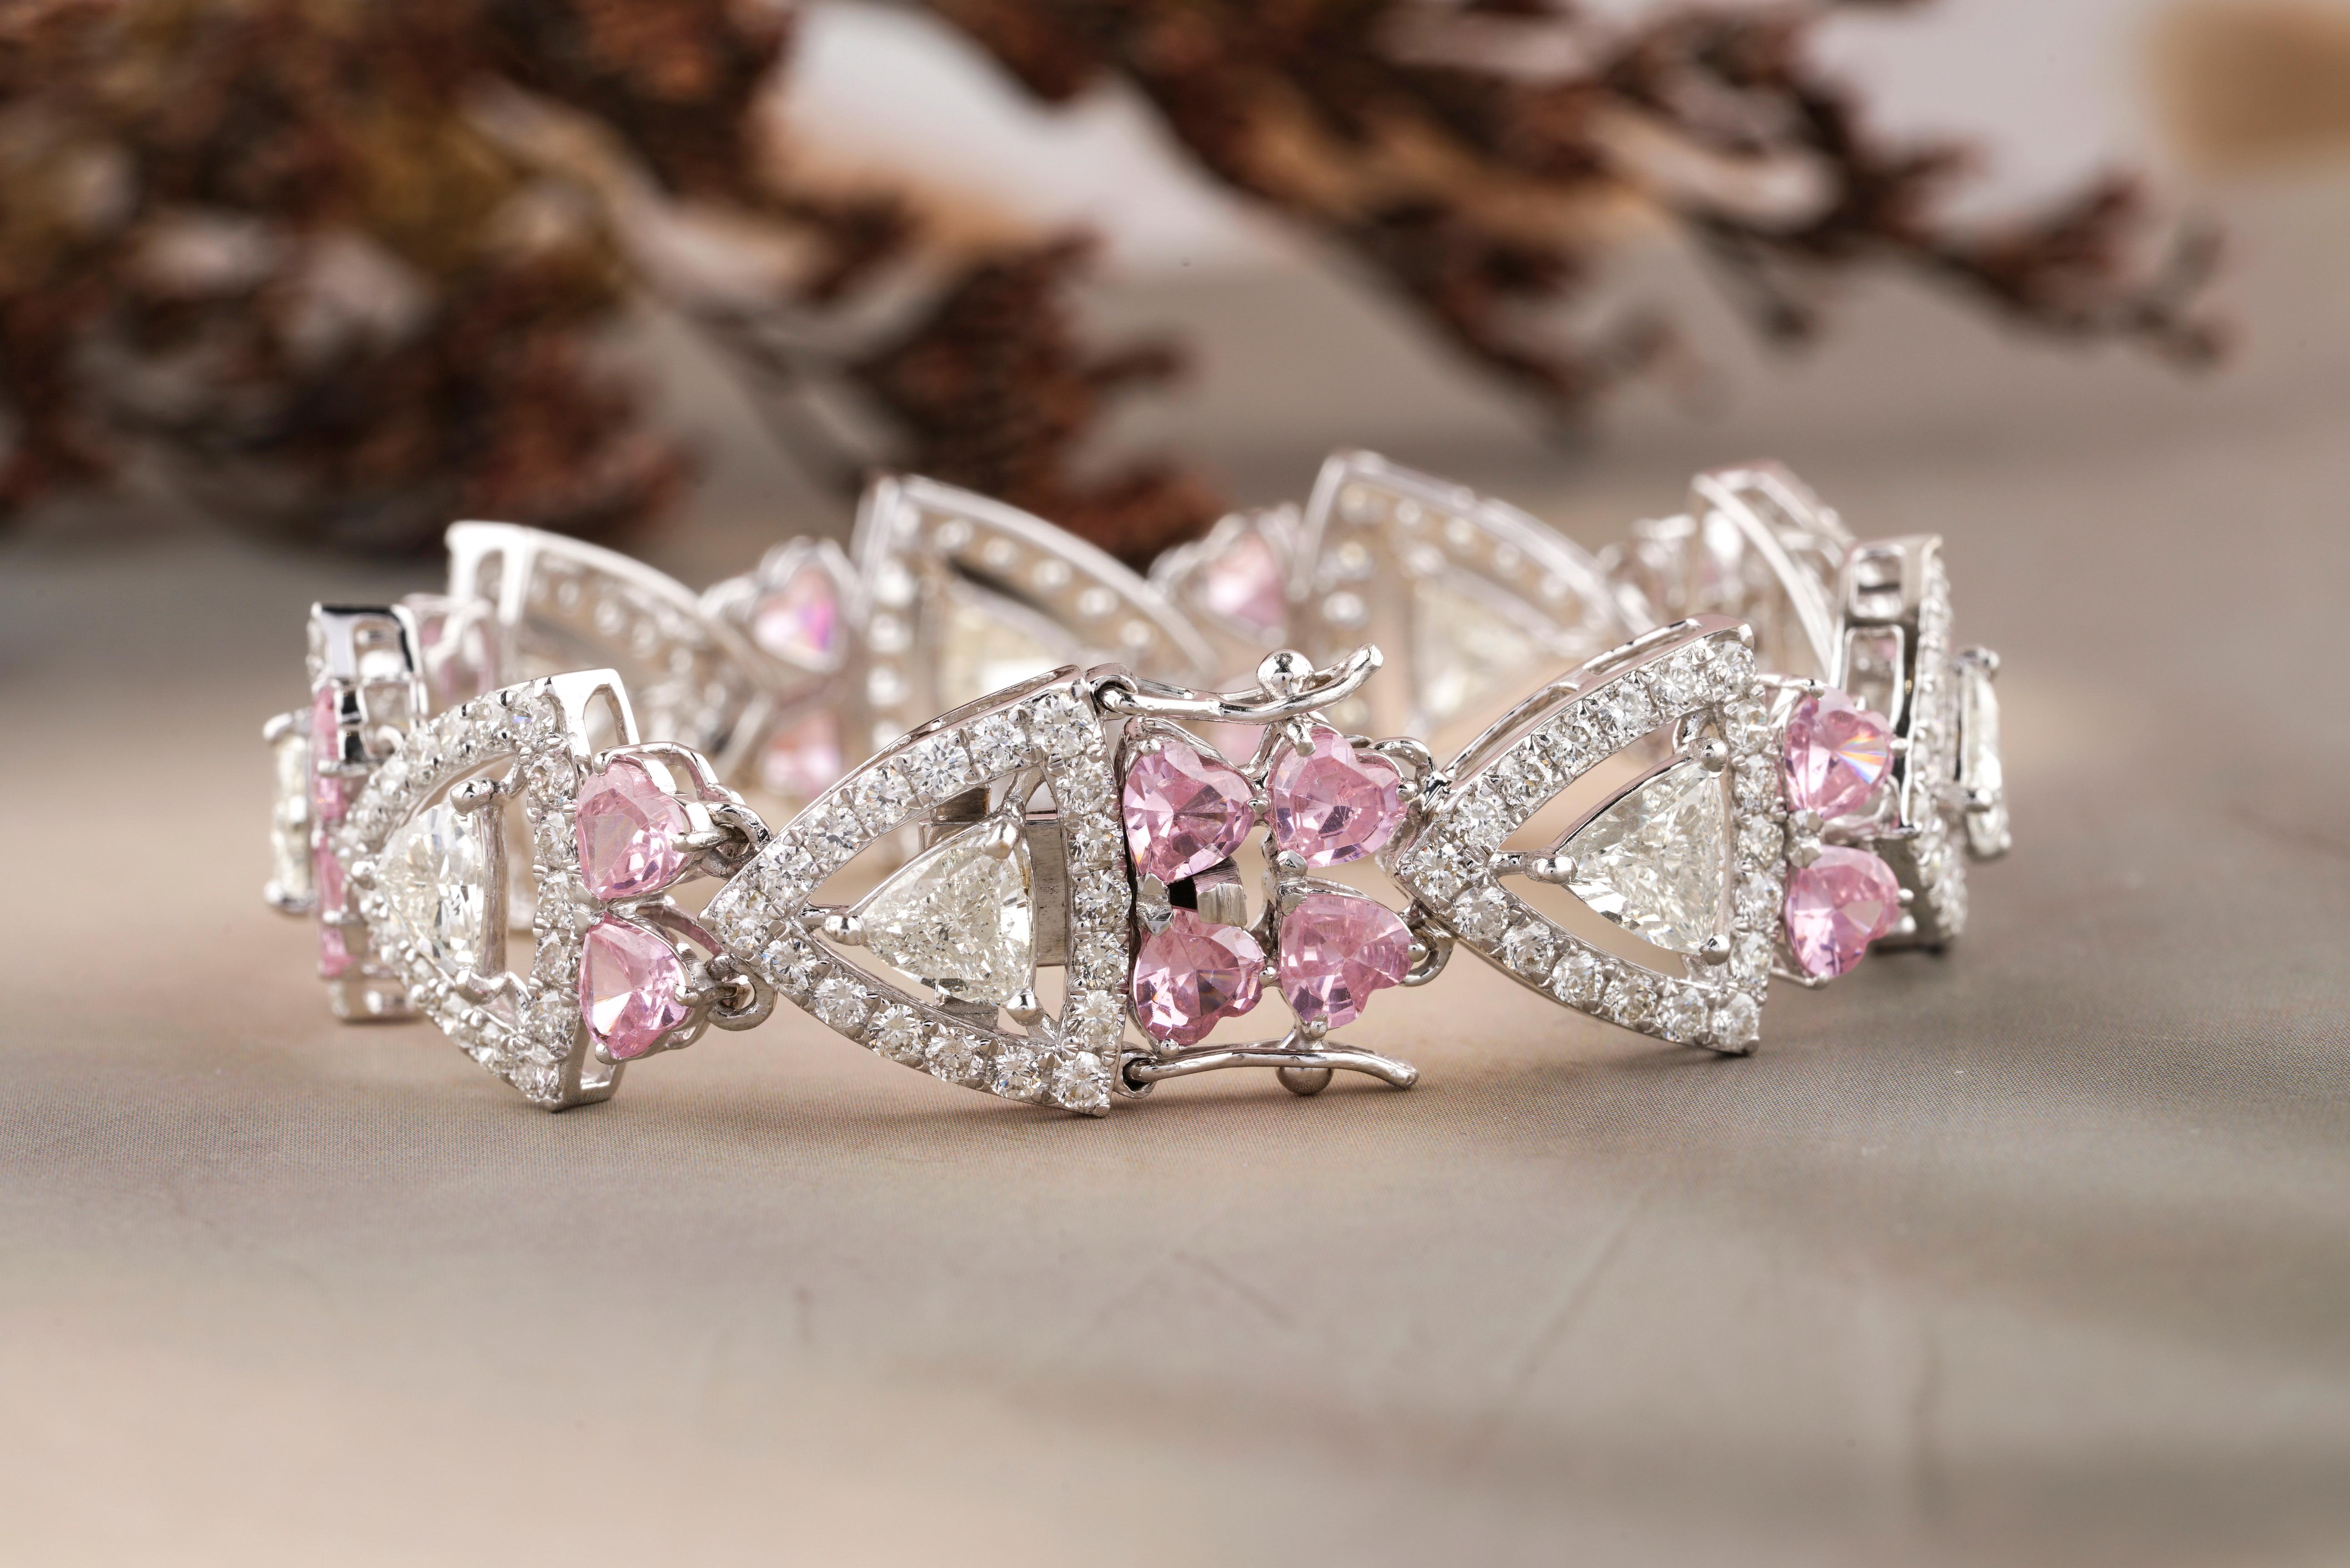 This diamond and pink tourmaline bracelet is a breathtaking piece of jewelry that combines the timeless beauty of diamonds with the vibrant and feminine charm of pink tourmaline. This piece features trillion & round cut diamonds with heart-shaped